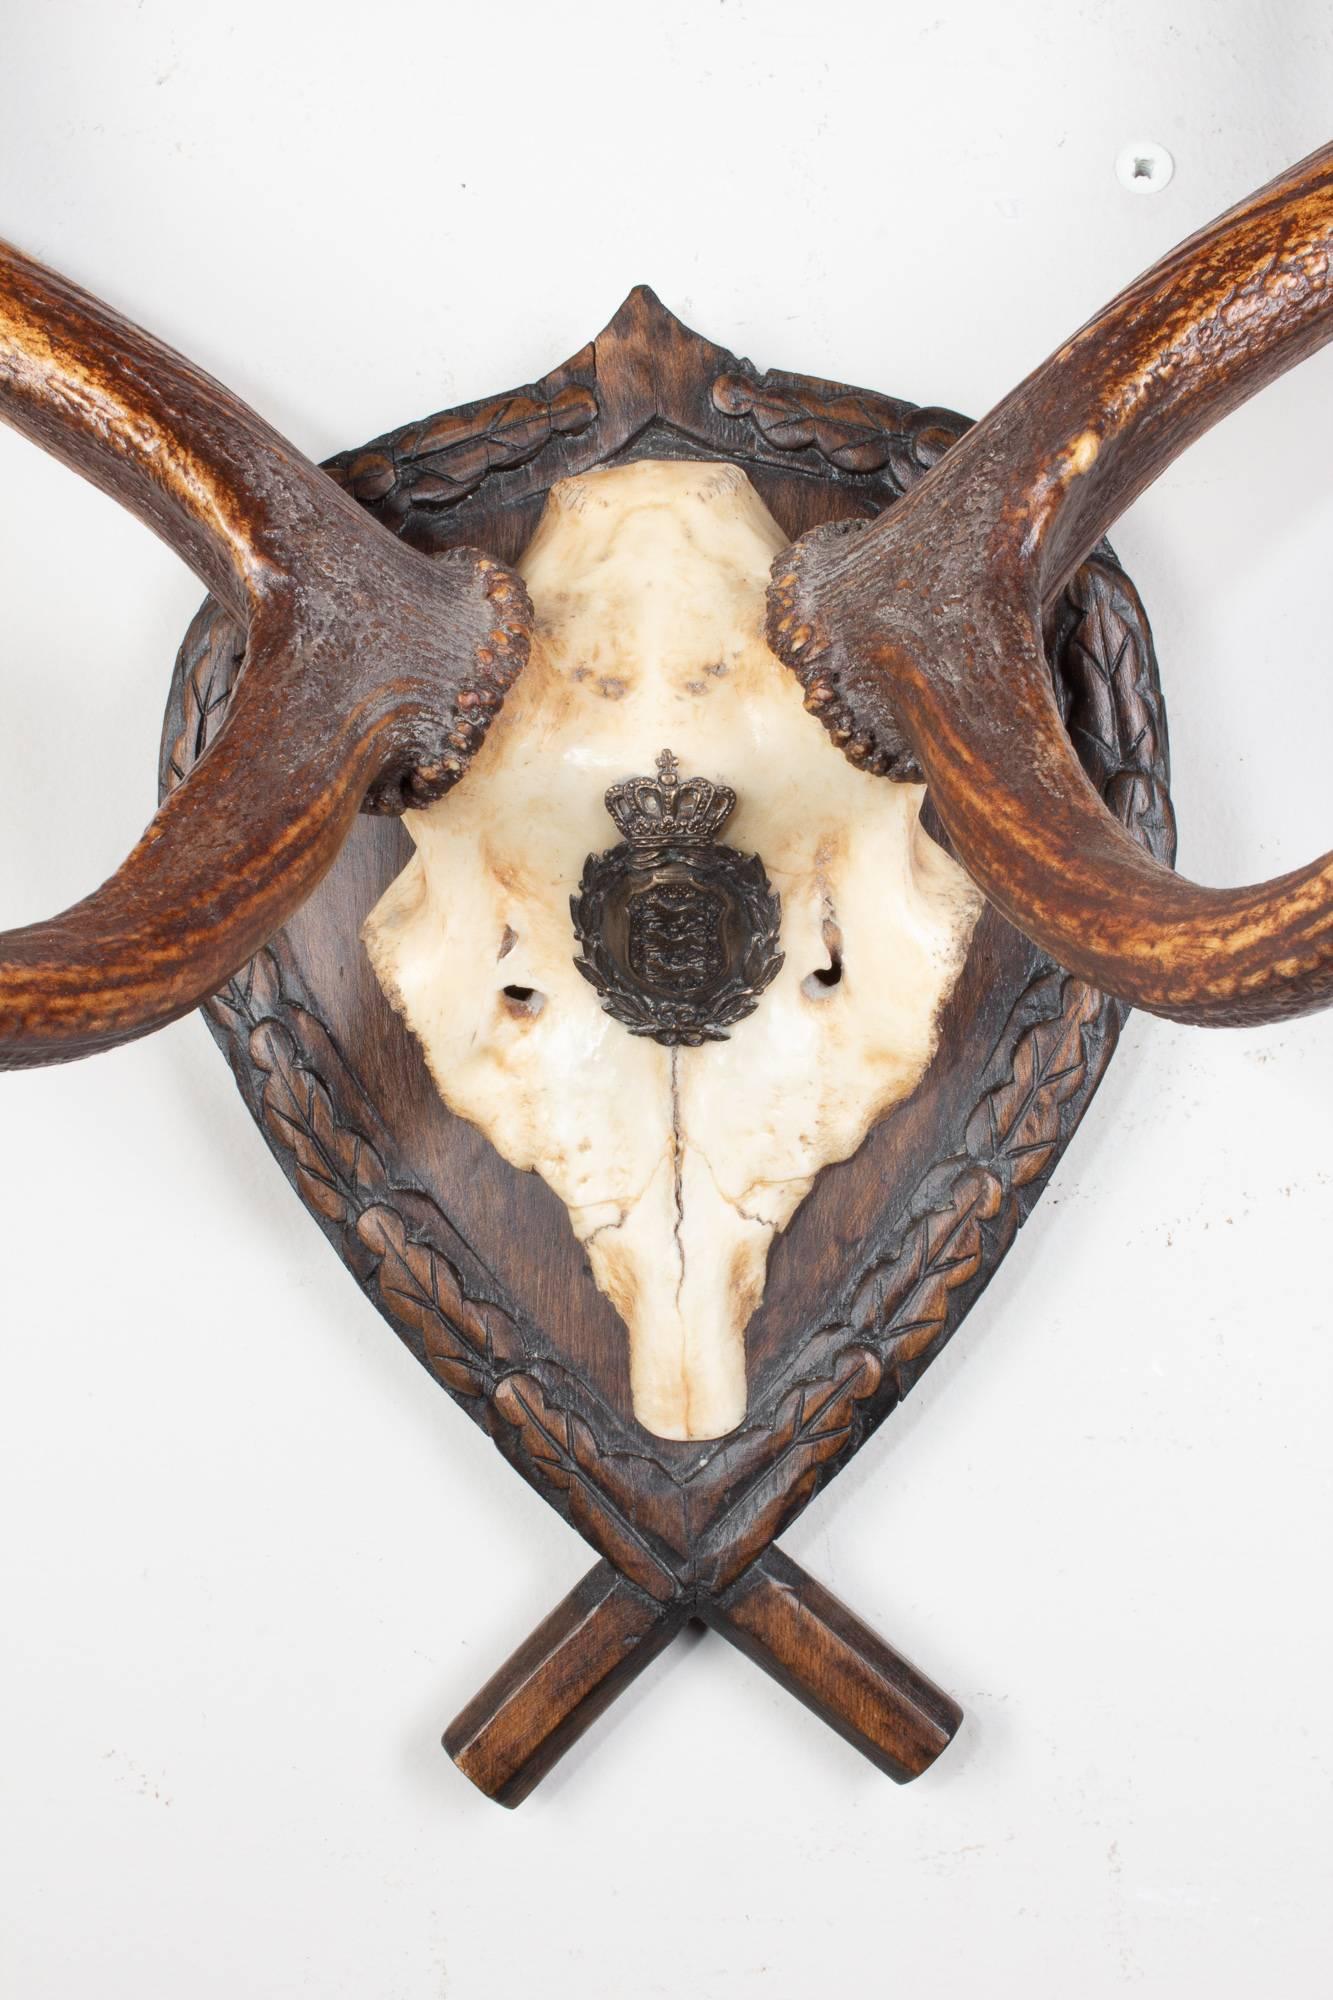 19th century Austrian fallow deer trophy on original Black Forest carved plaque that hung in Emperor Franz Josef's castle at Eckartsau in the Southern Austrian Alps. Eckartsau was a favorite hunting schloss of the Habsburg family. The plaque itself